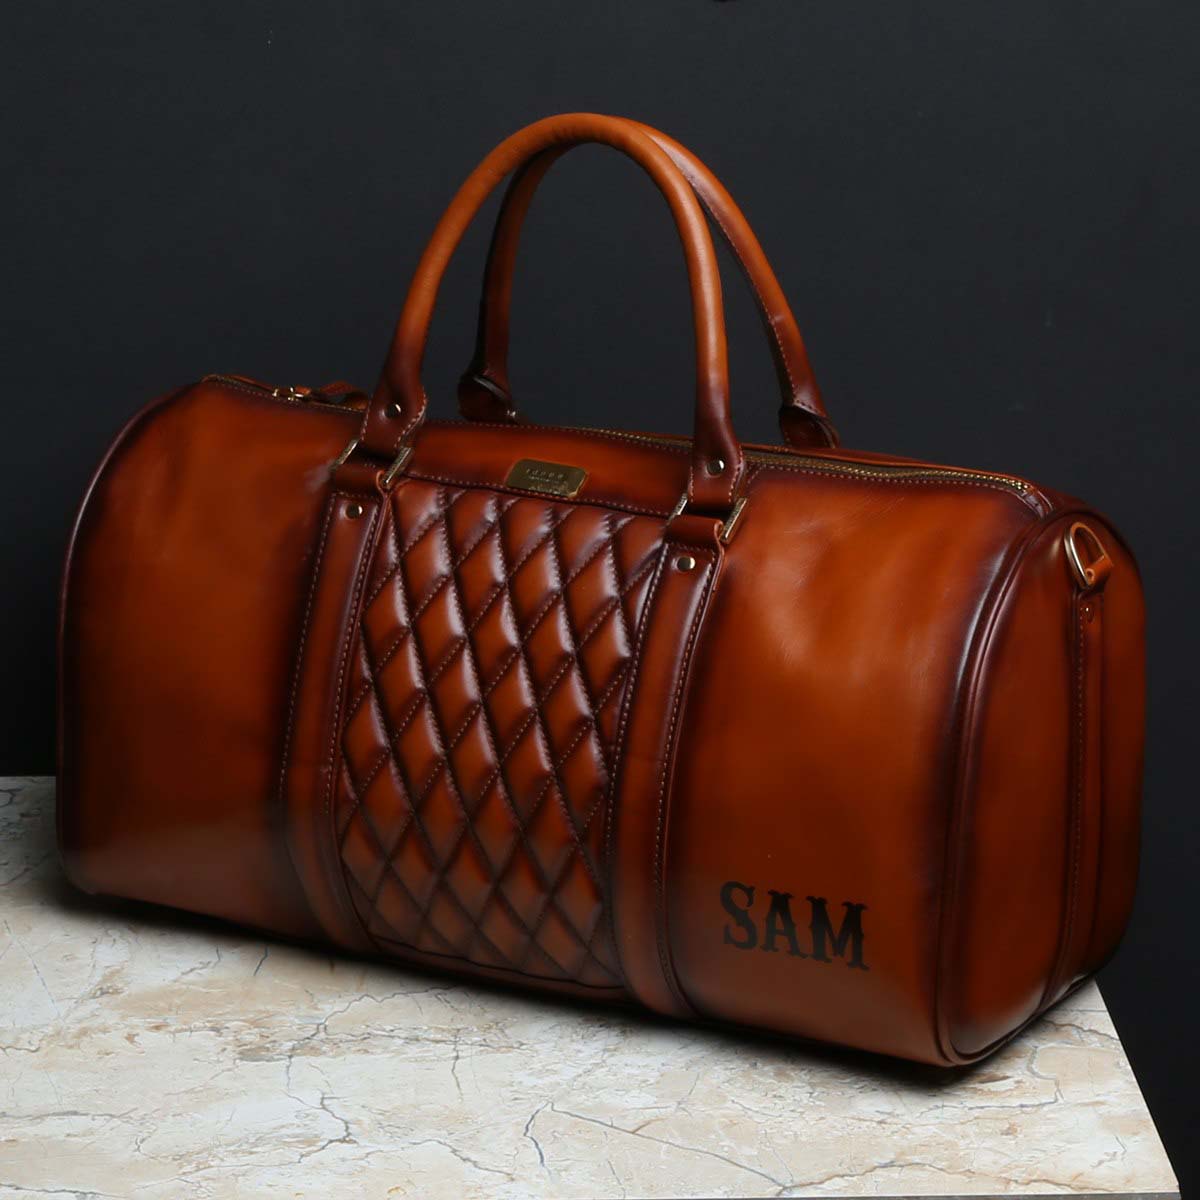 Tailored Tan Leather Cushioned Stitched Duffle Bag with Name Initials SAM by Brune & Bareskin